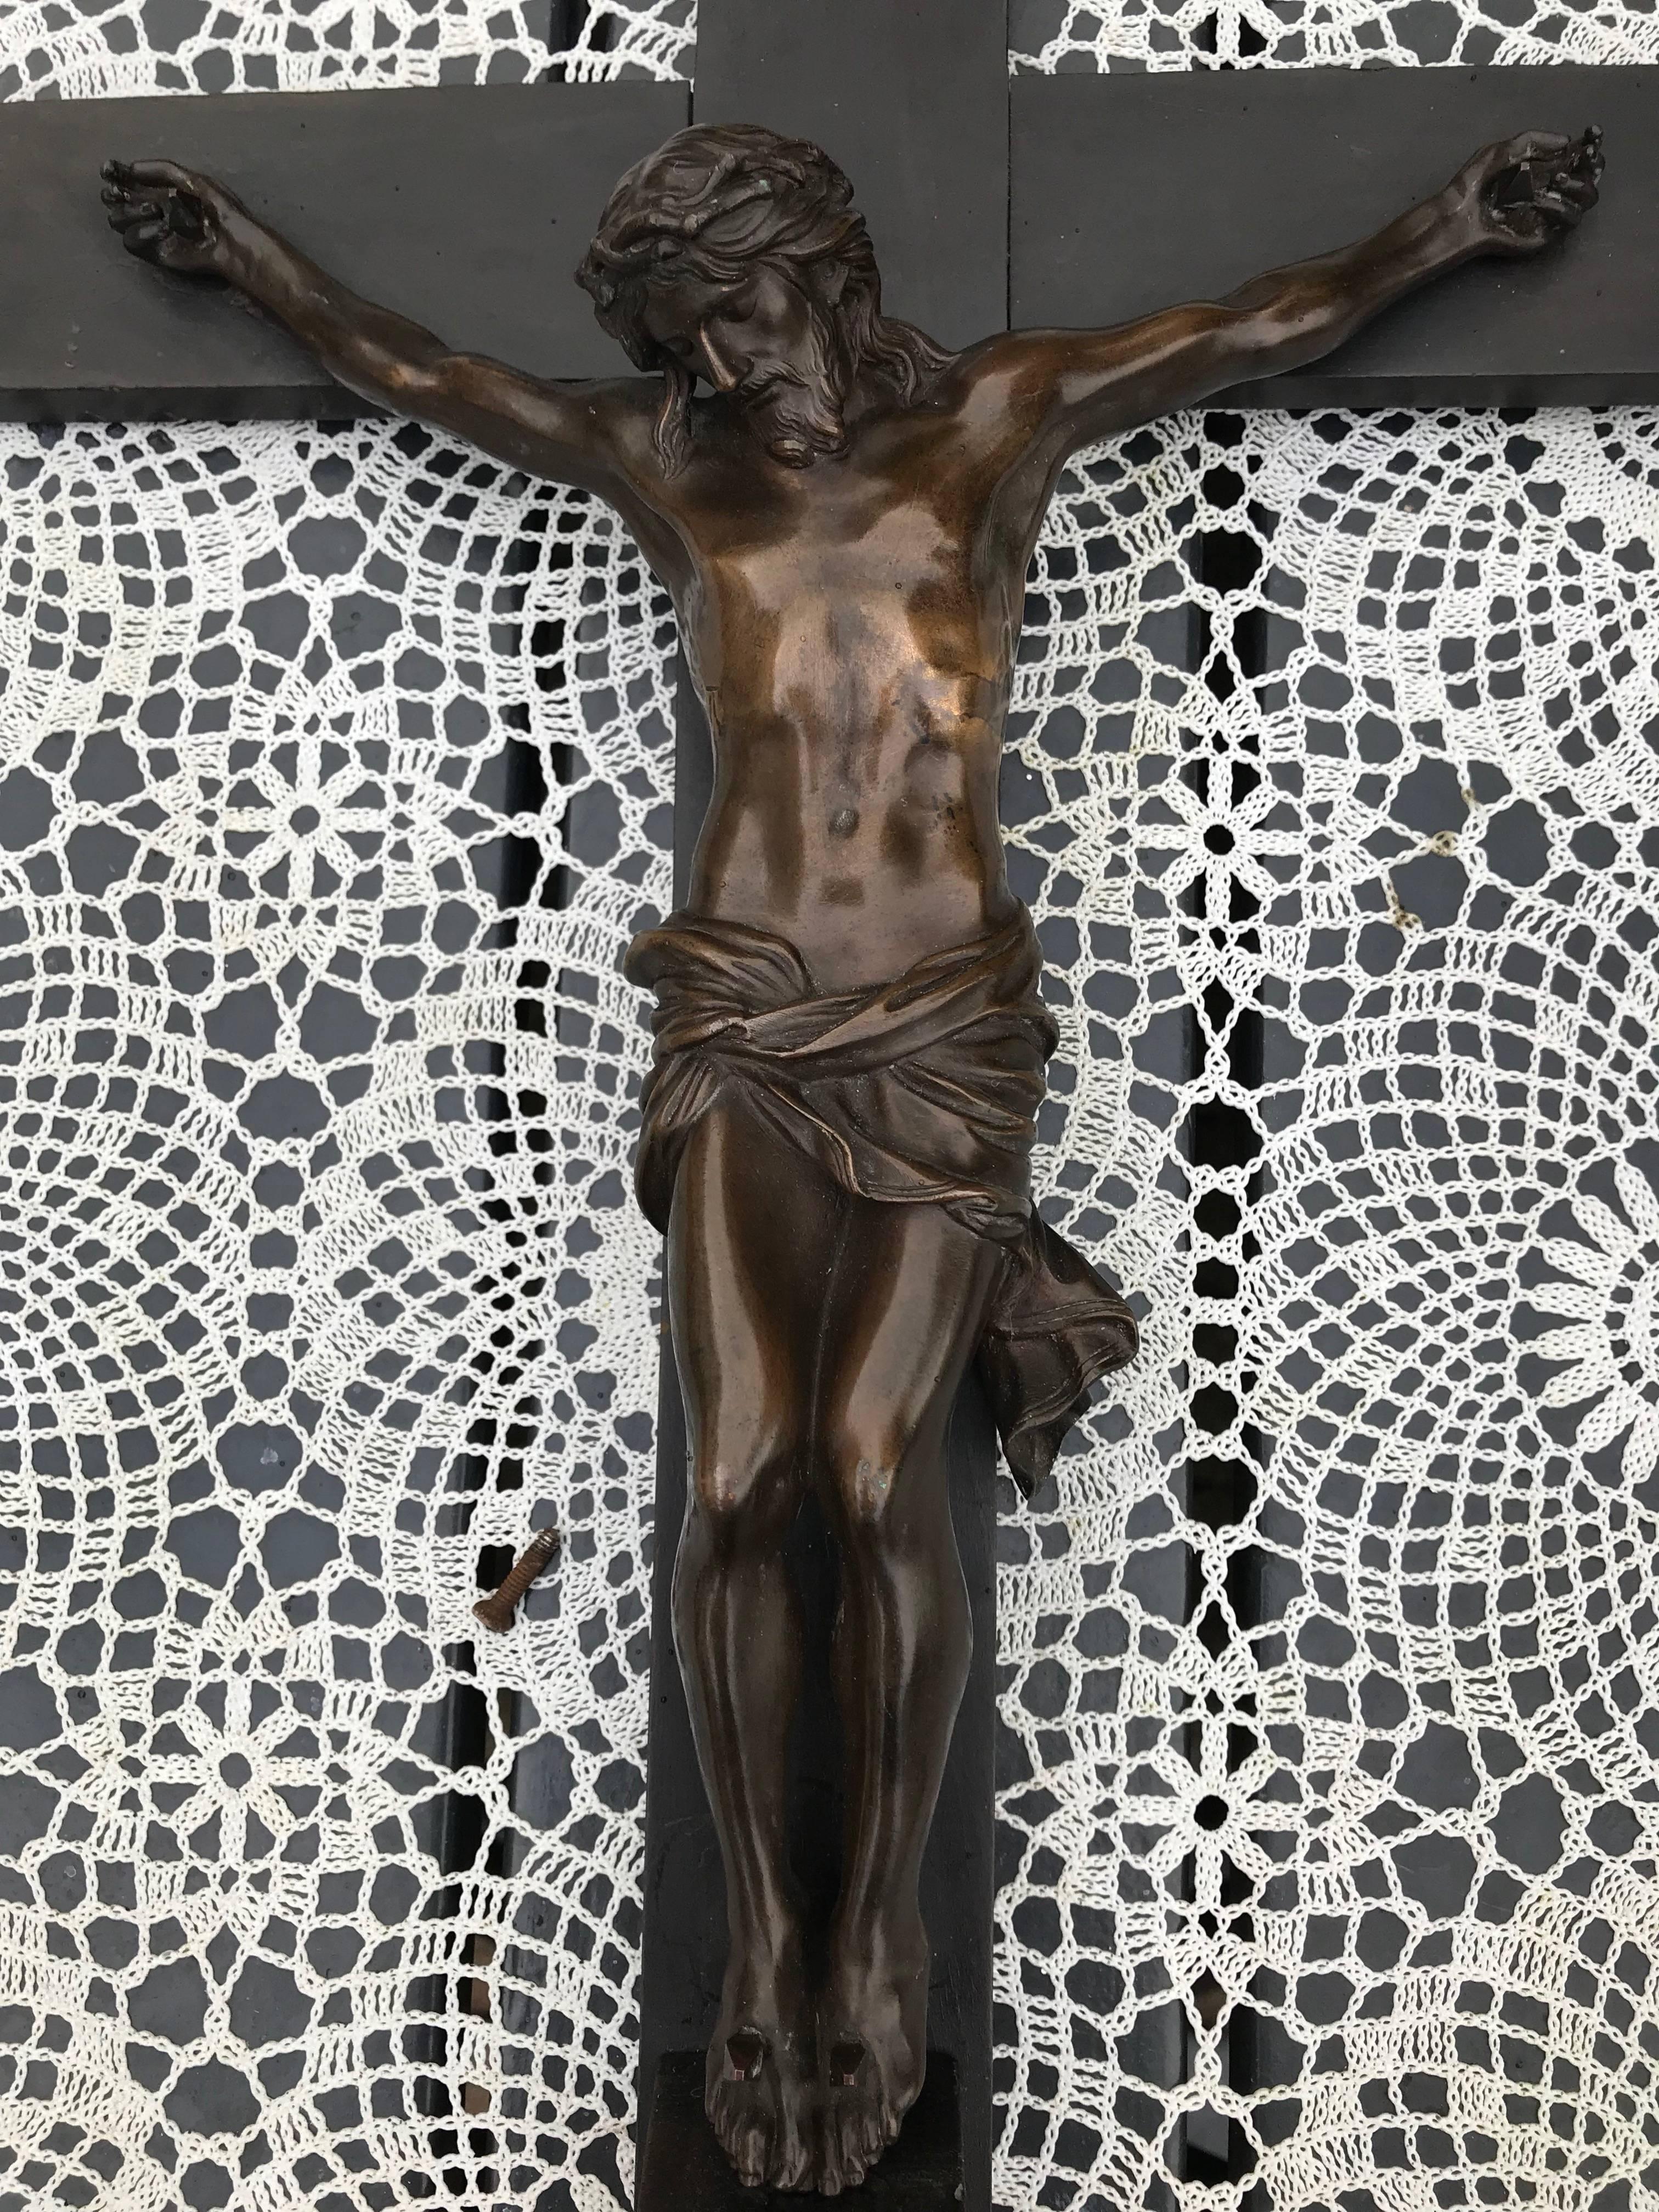 Rare and important bronze crucifix by French ‘fondeur’ Barbedienne. 

Ferdinand Barbedienne (1810-1892) does not need any further introduction, but that he also made top quality religious art is not known to many people. This magnificent and